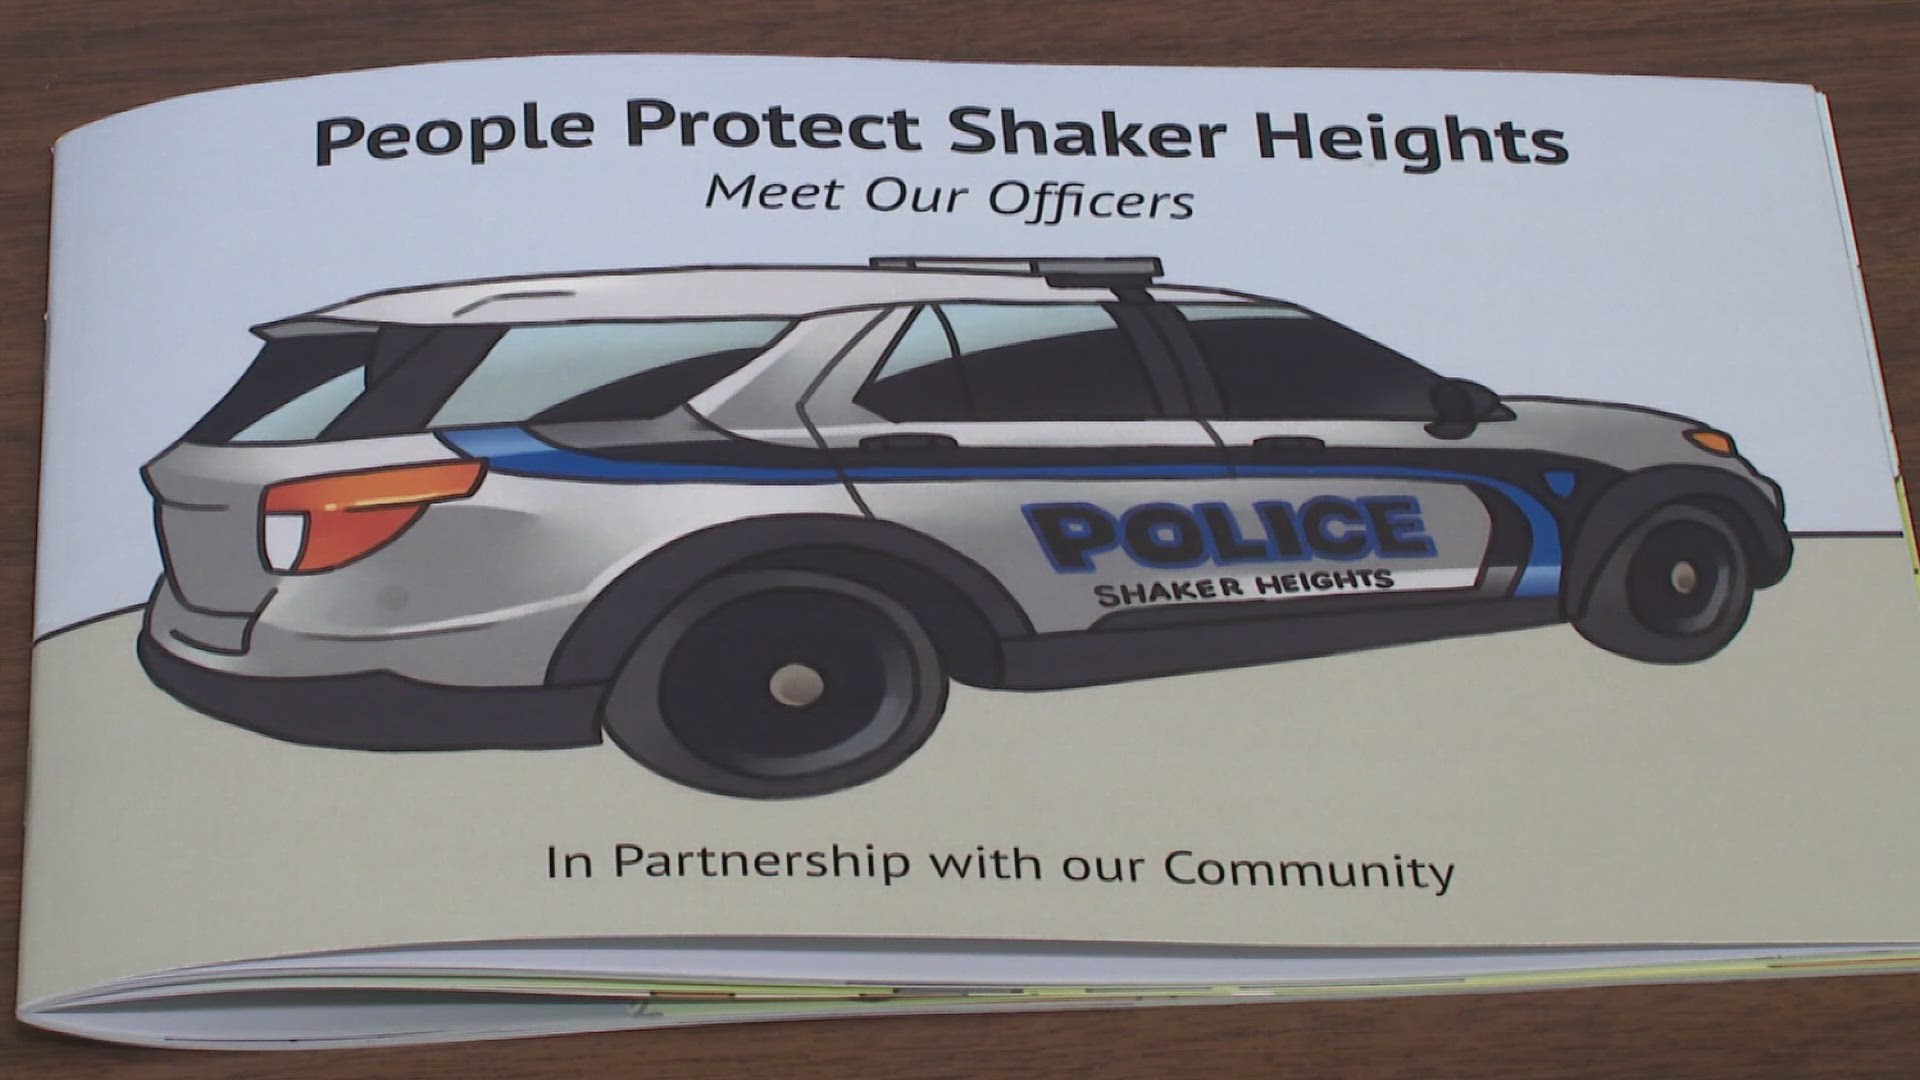 'People Protect Shaker Heights' highlights stories about what officers like to do when they're not on the clock.